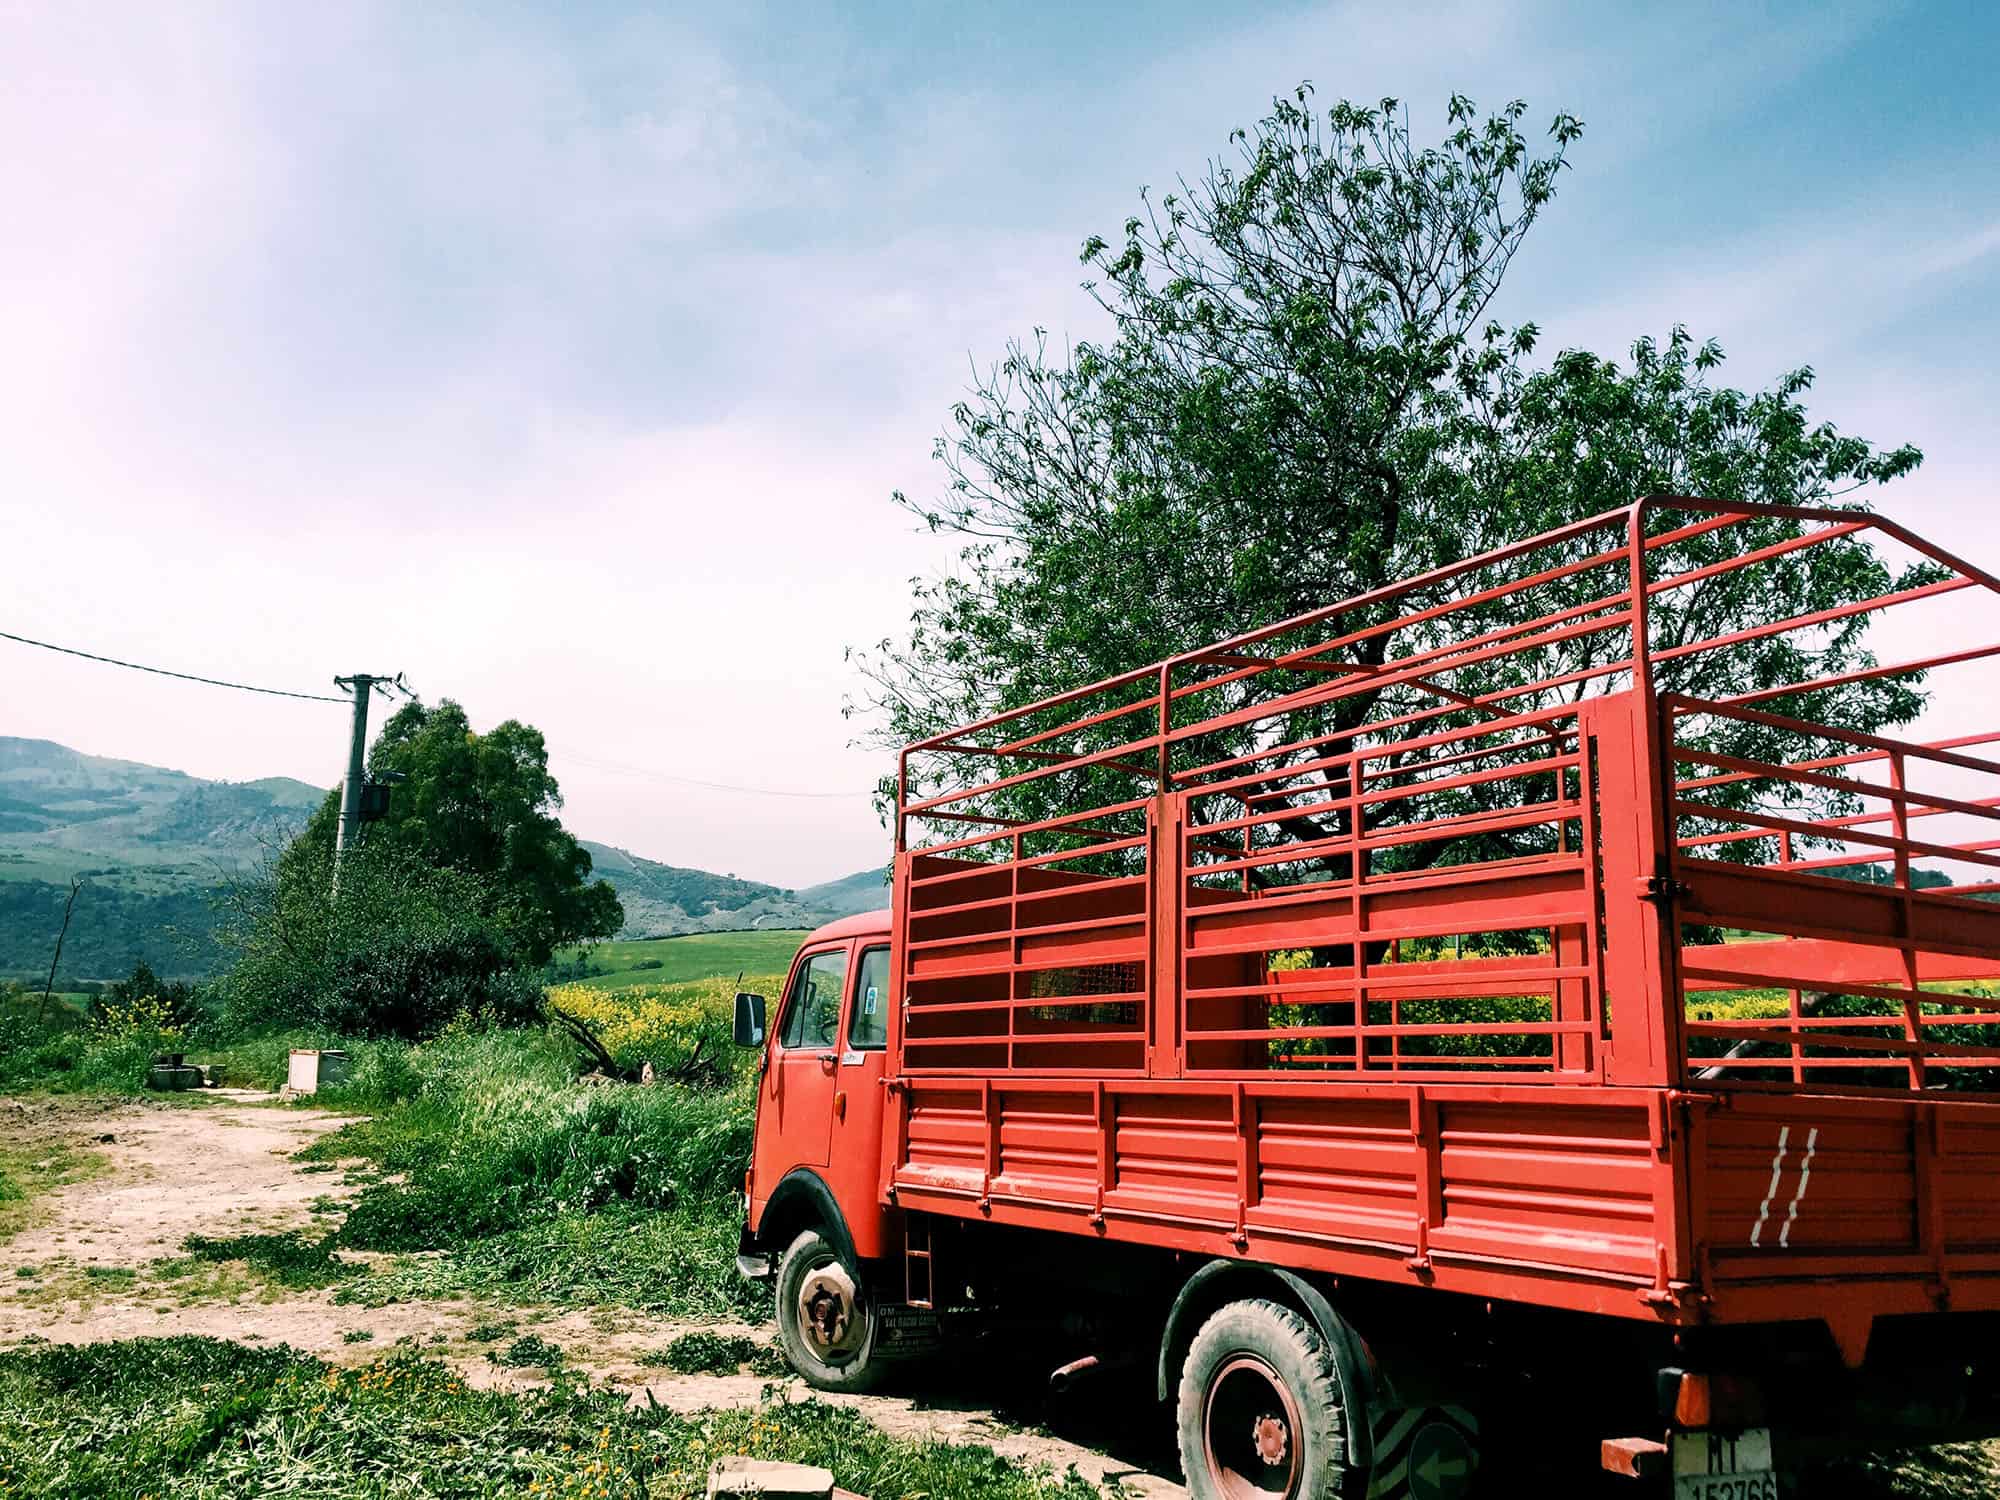 A truck on the farm that supplies much of the Palazzo Margheritaís produce.